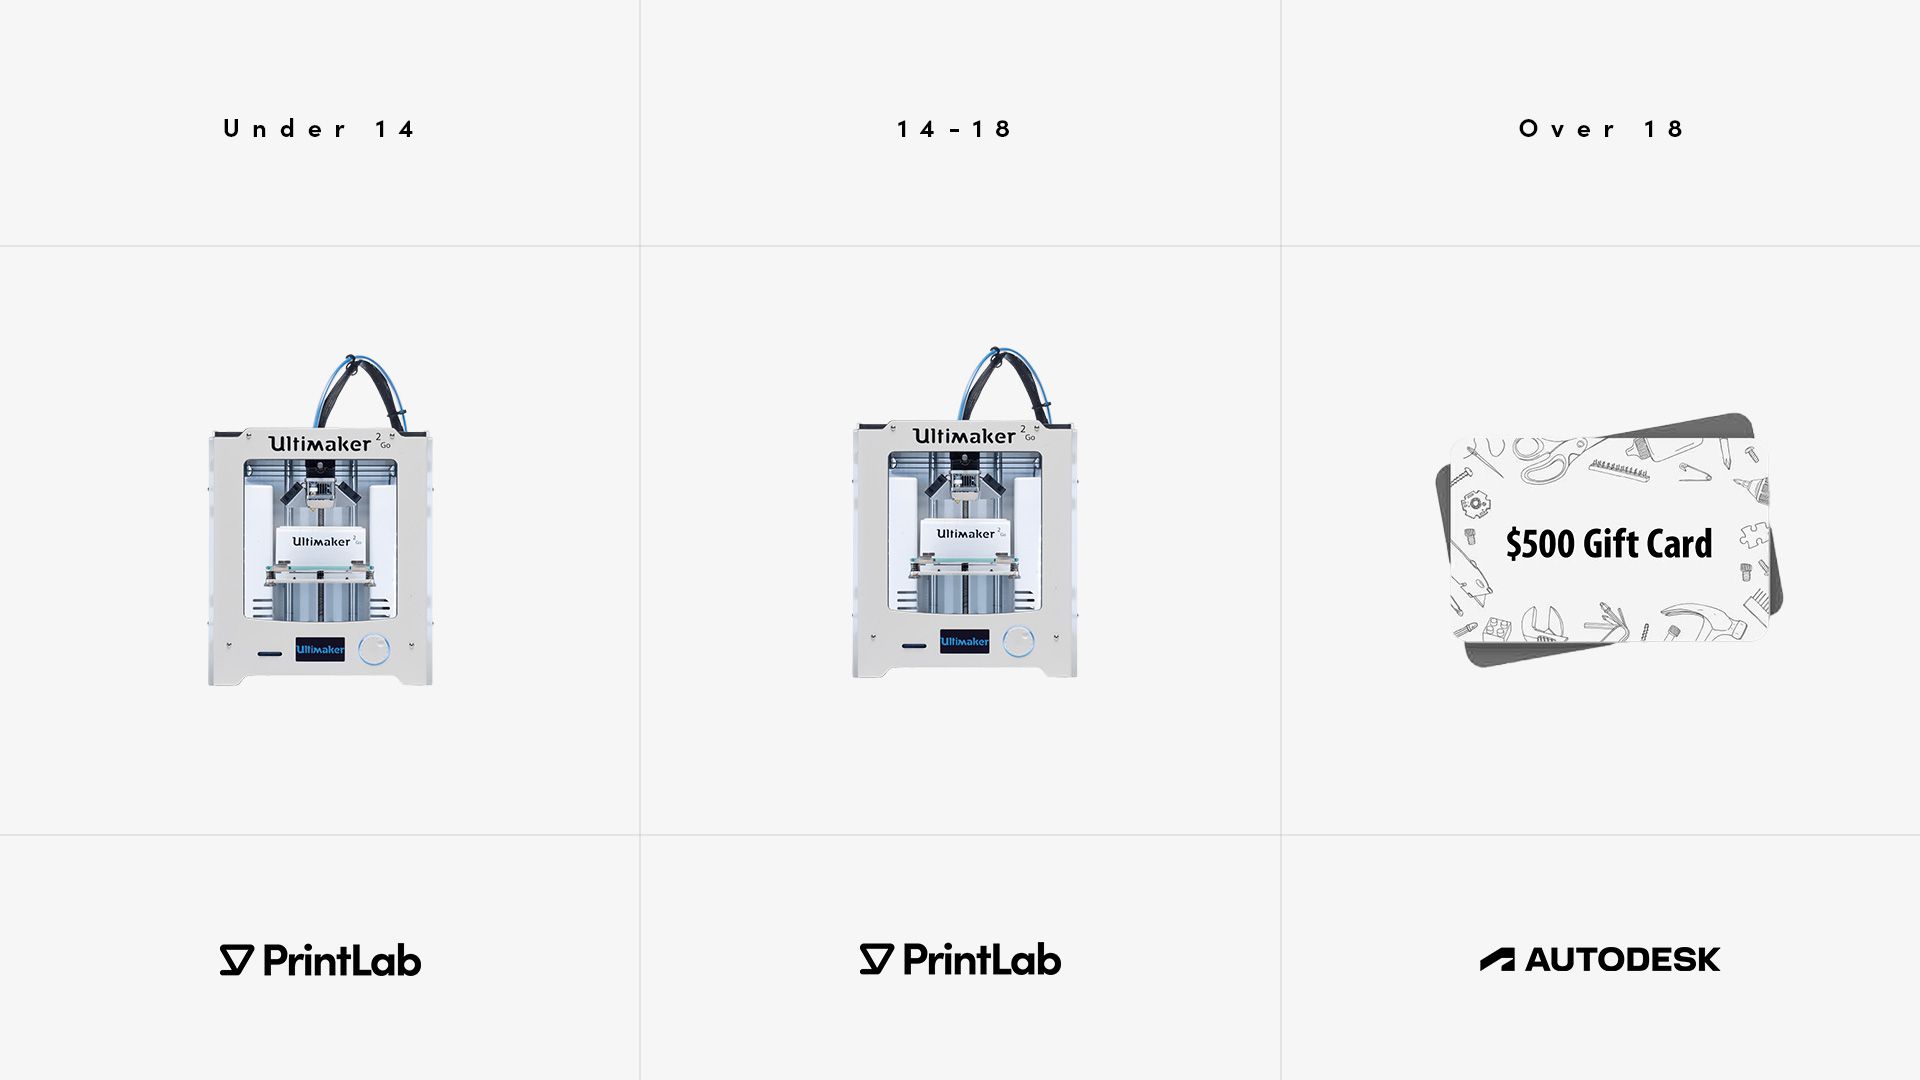 Prizes for the Make:able Challenge - including 2 Ultimaker 2 Go 3D printers and a $500 gift card.